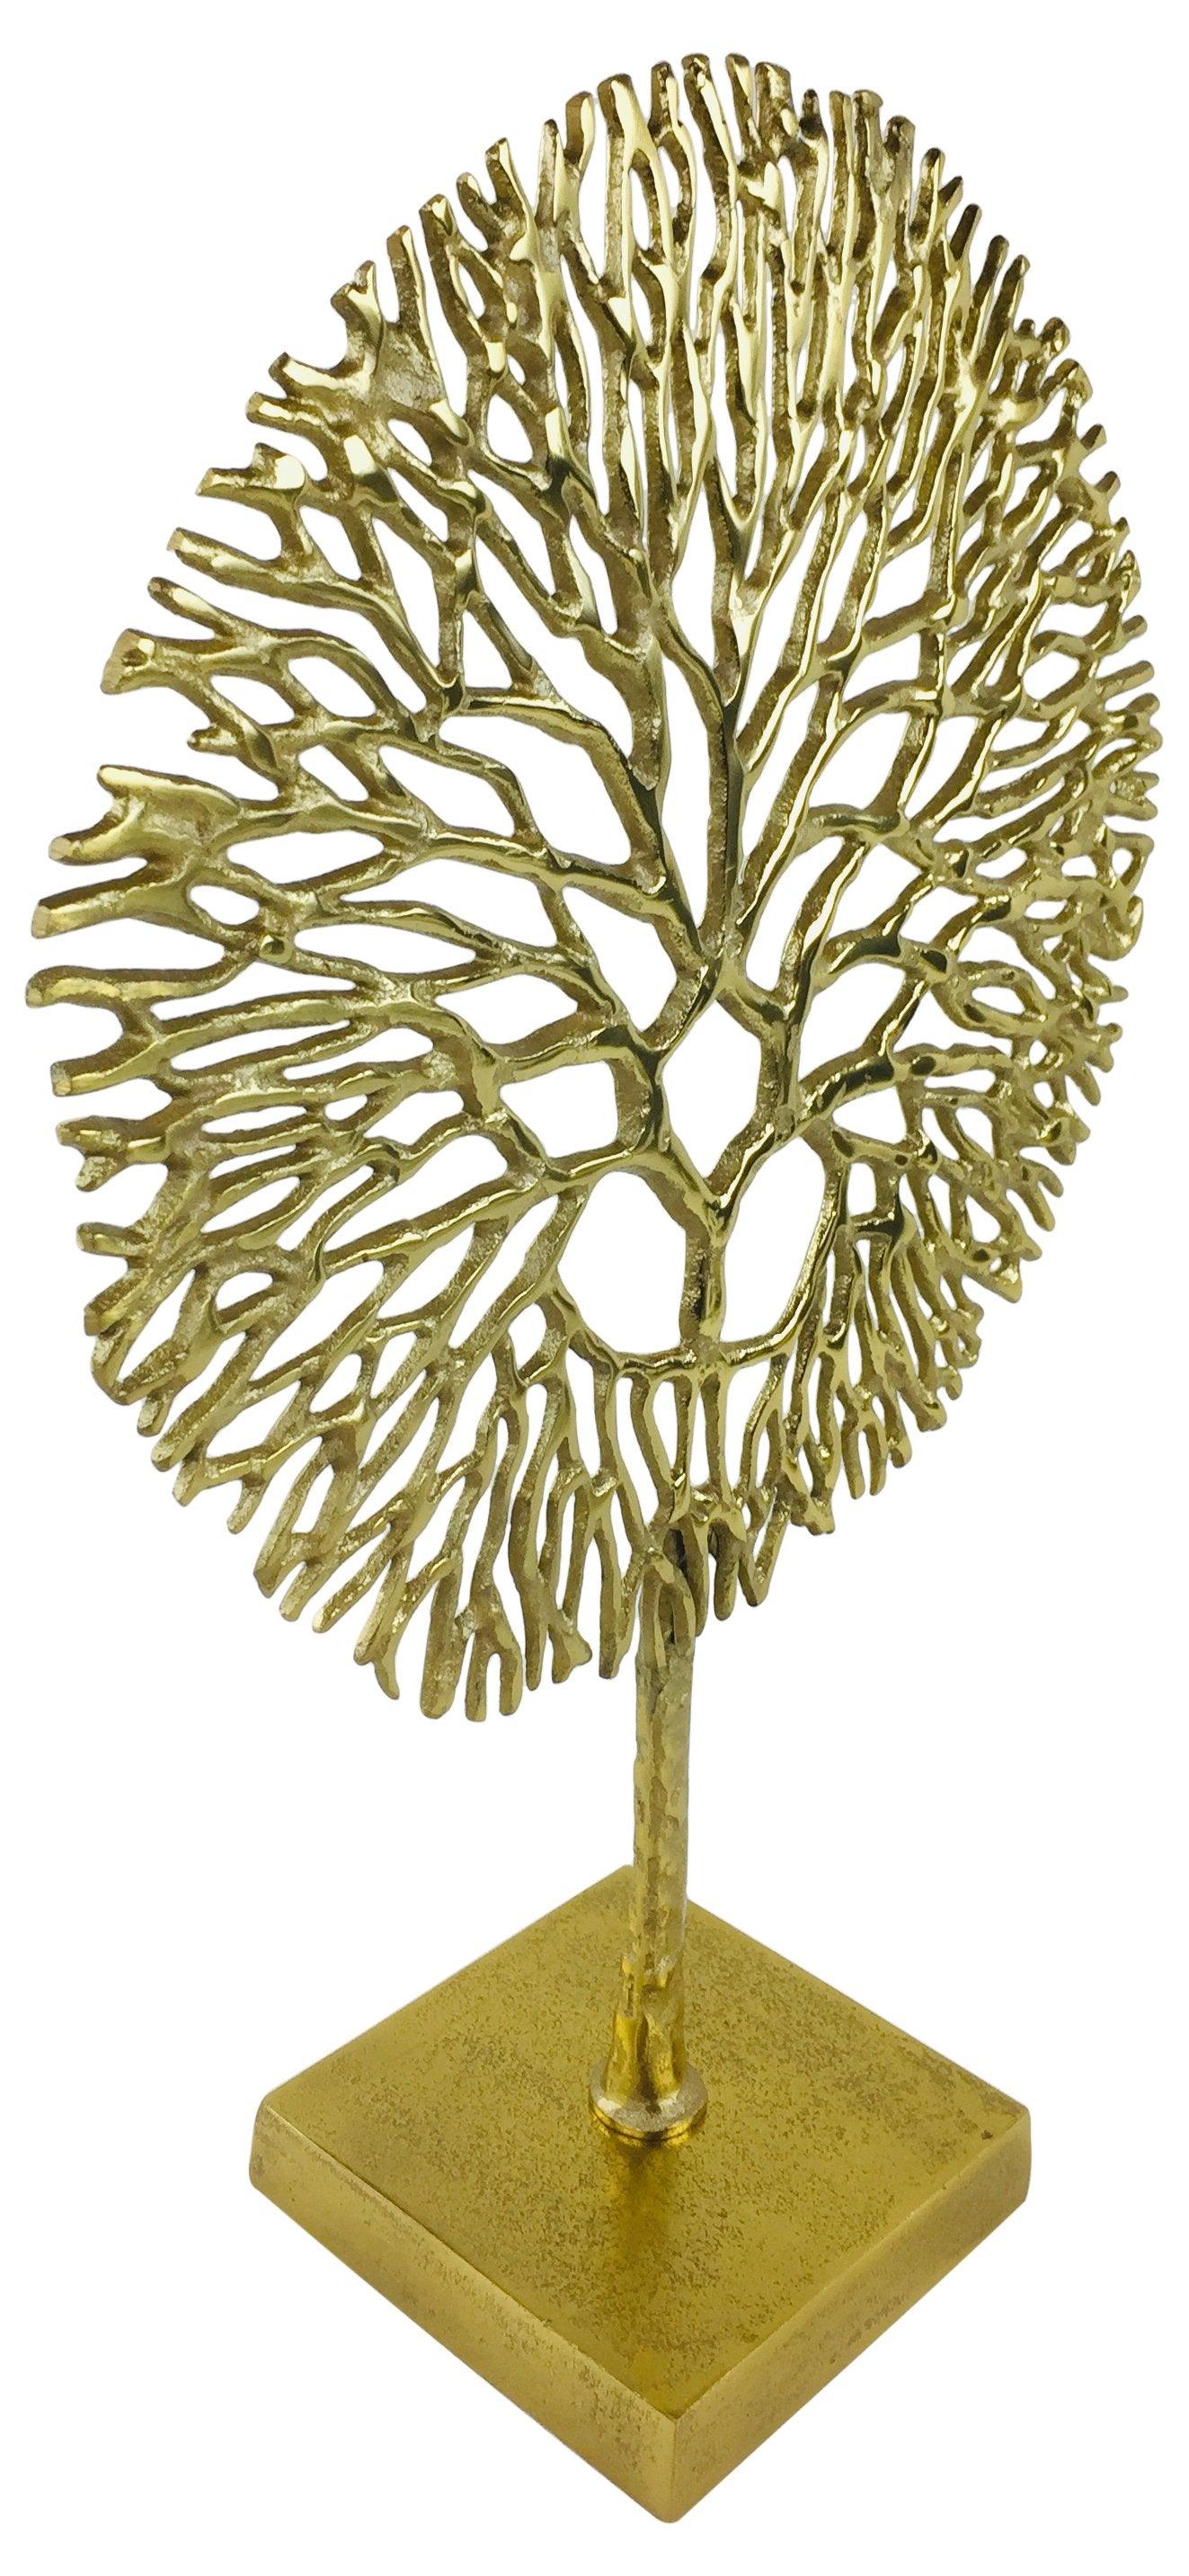 View Gold Coral Sculpture information